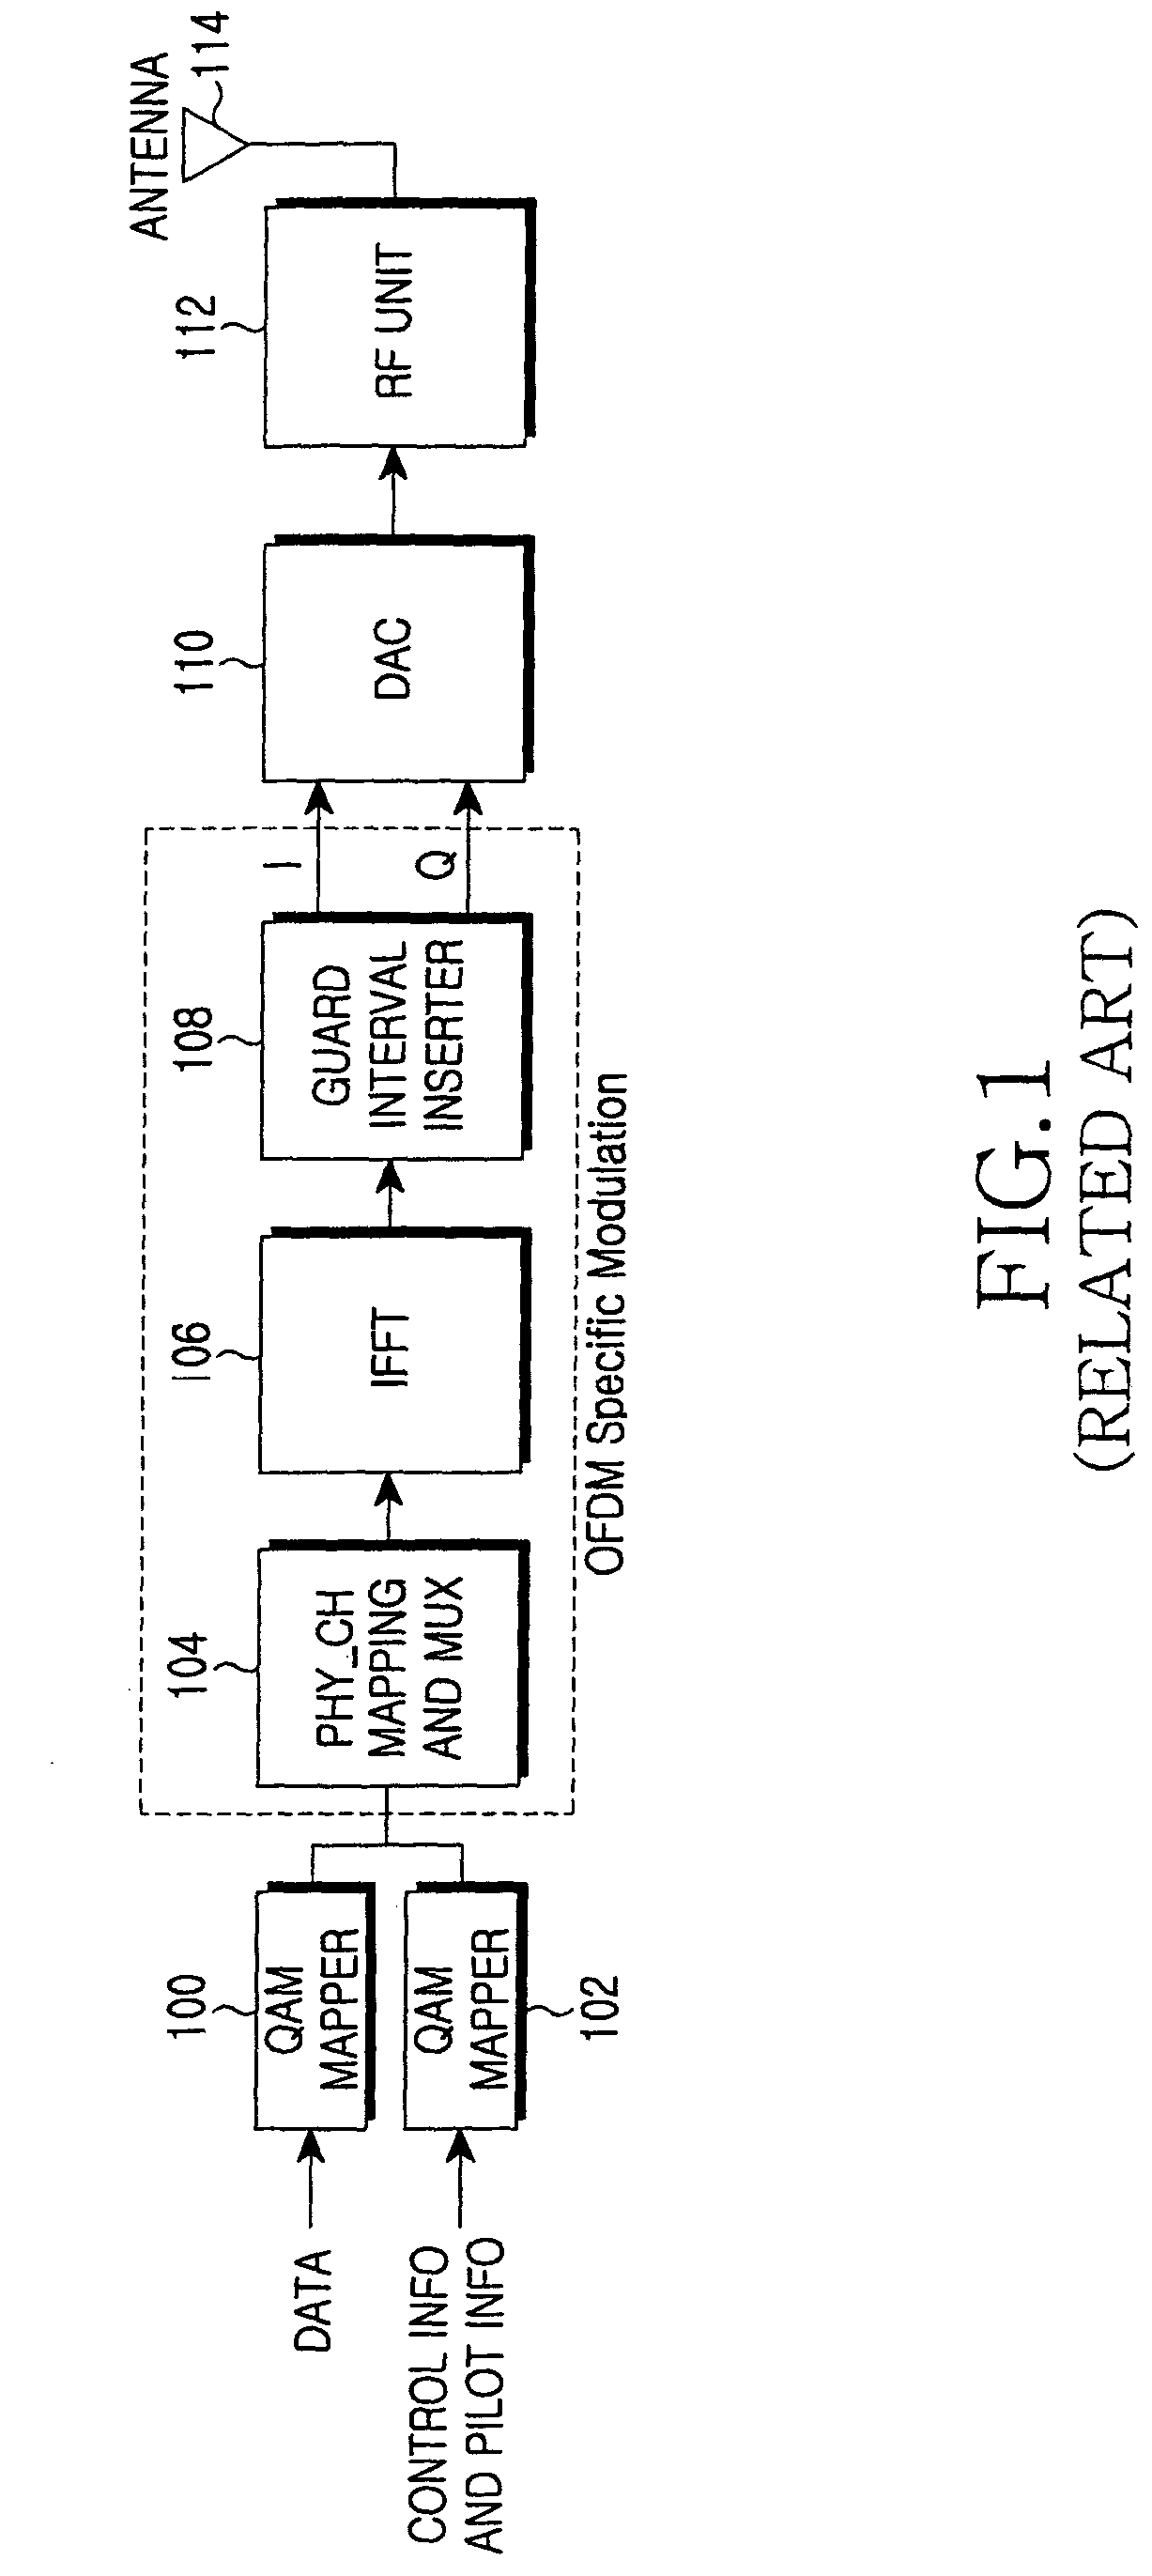 Apparatus and method for allocating frequencies in an OFDM mobile communication system supporting high speed downlink packet access service